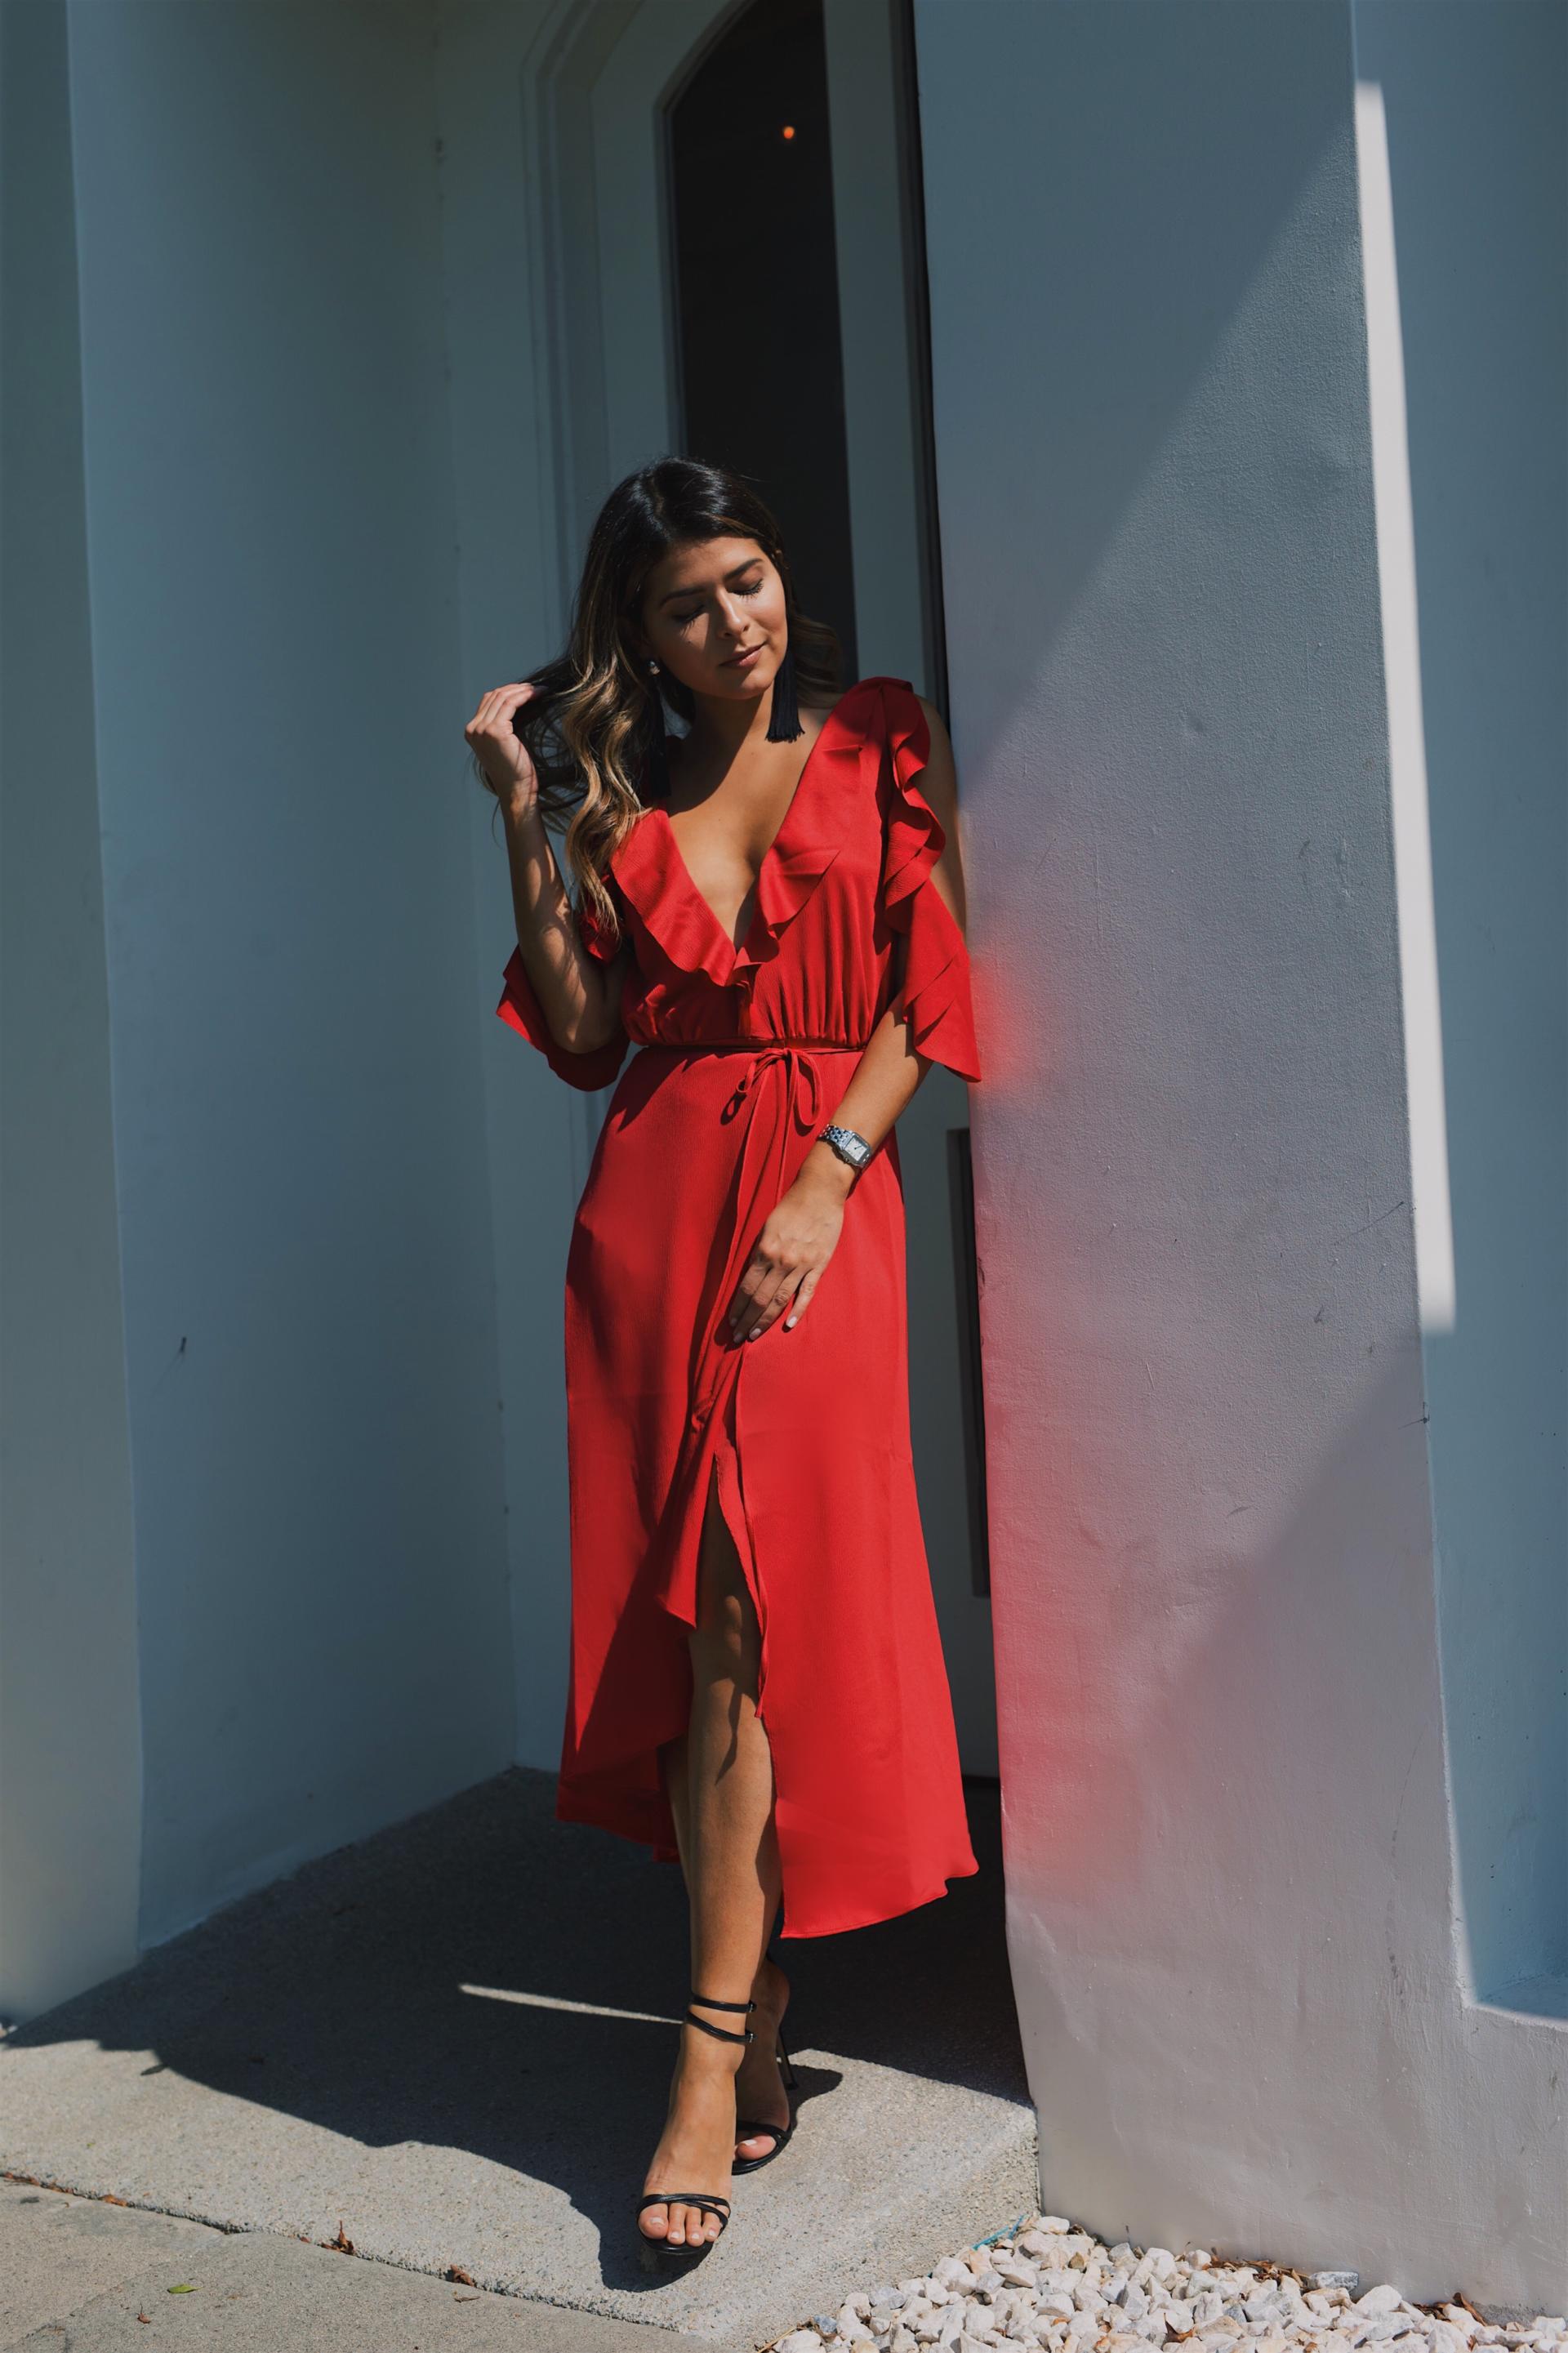 Summer's Best Red Dresses Under $150 // The girl From Panama